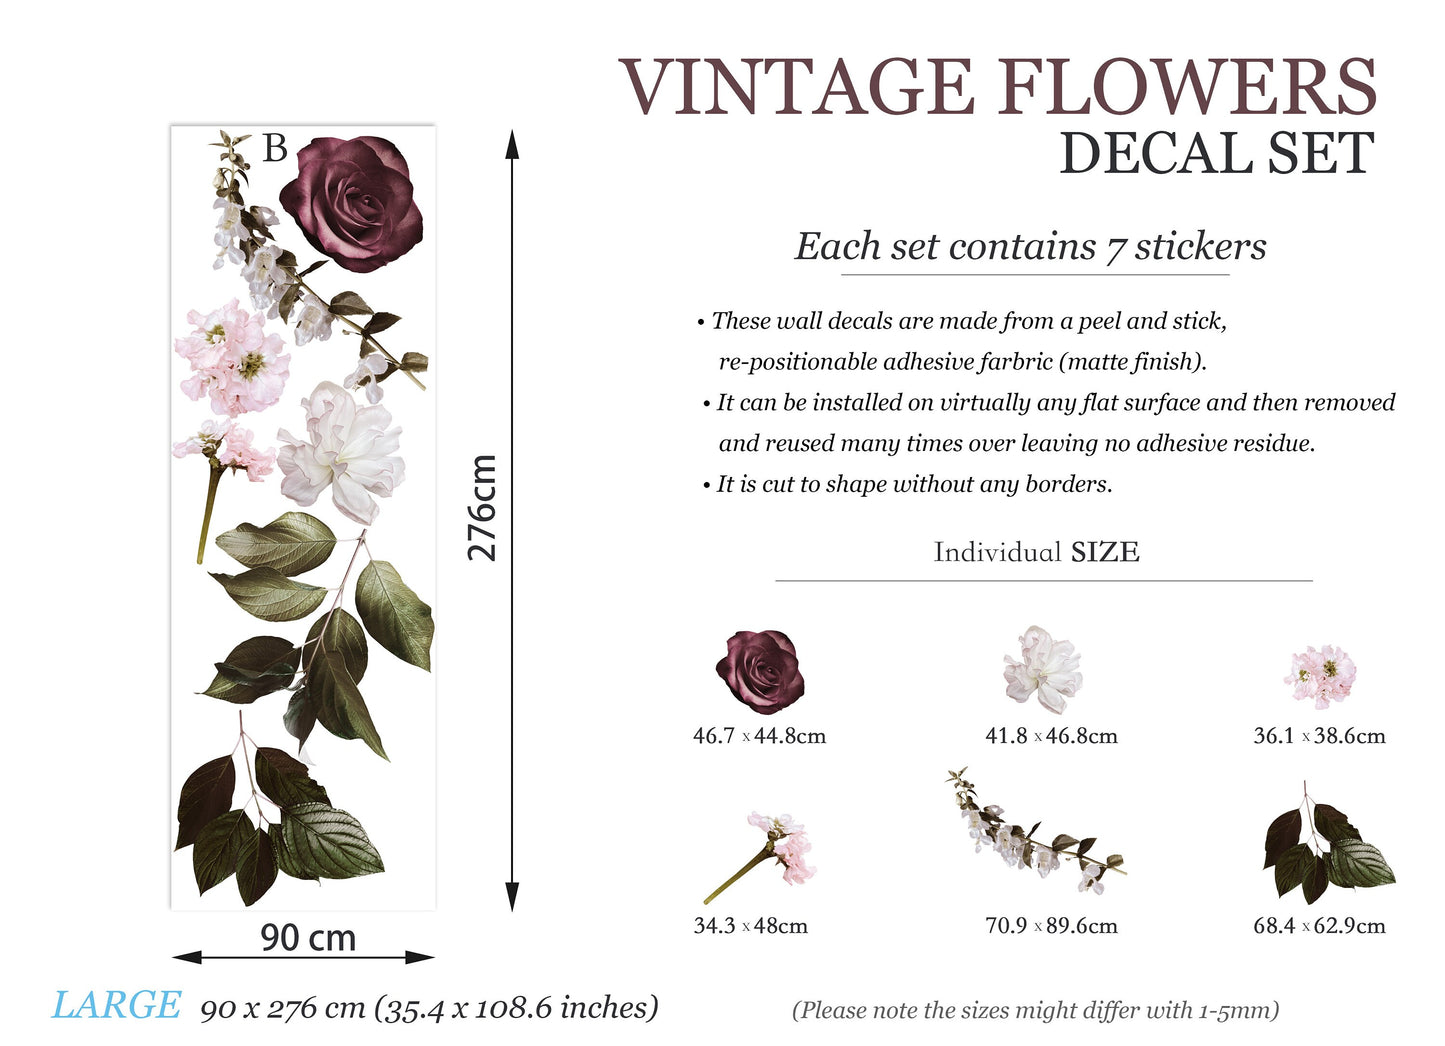 Vintage Burgundy Floral Wall Decal Set - Peony Rose Fabric Sticker for Room Decor - BR115